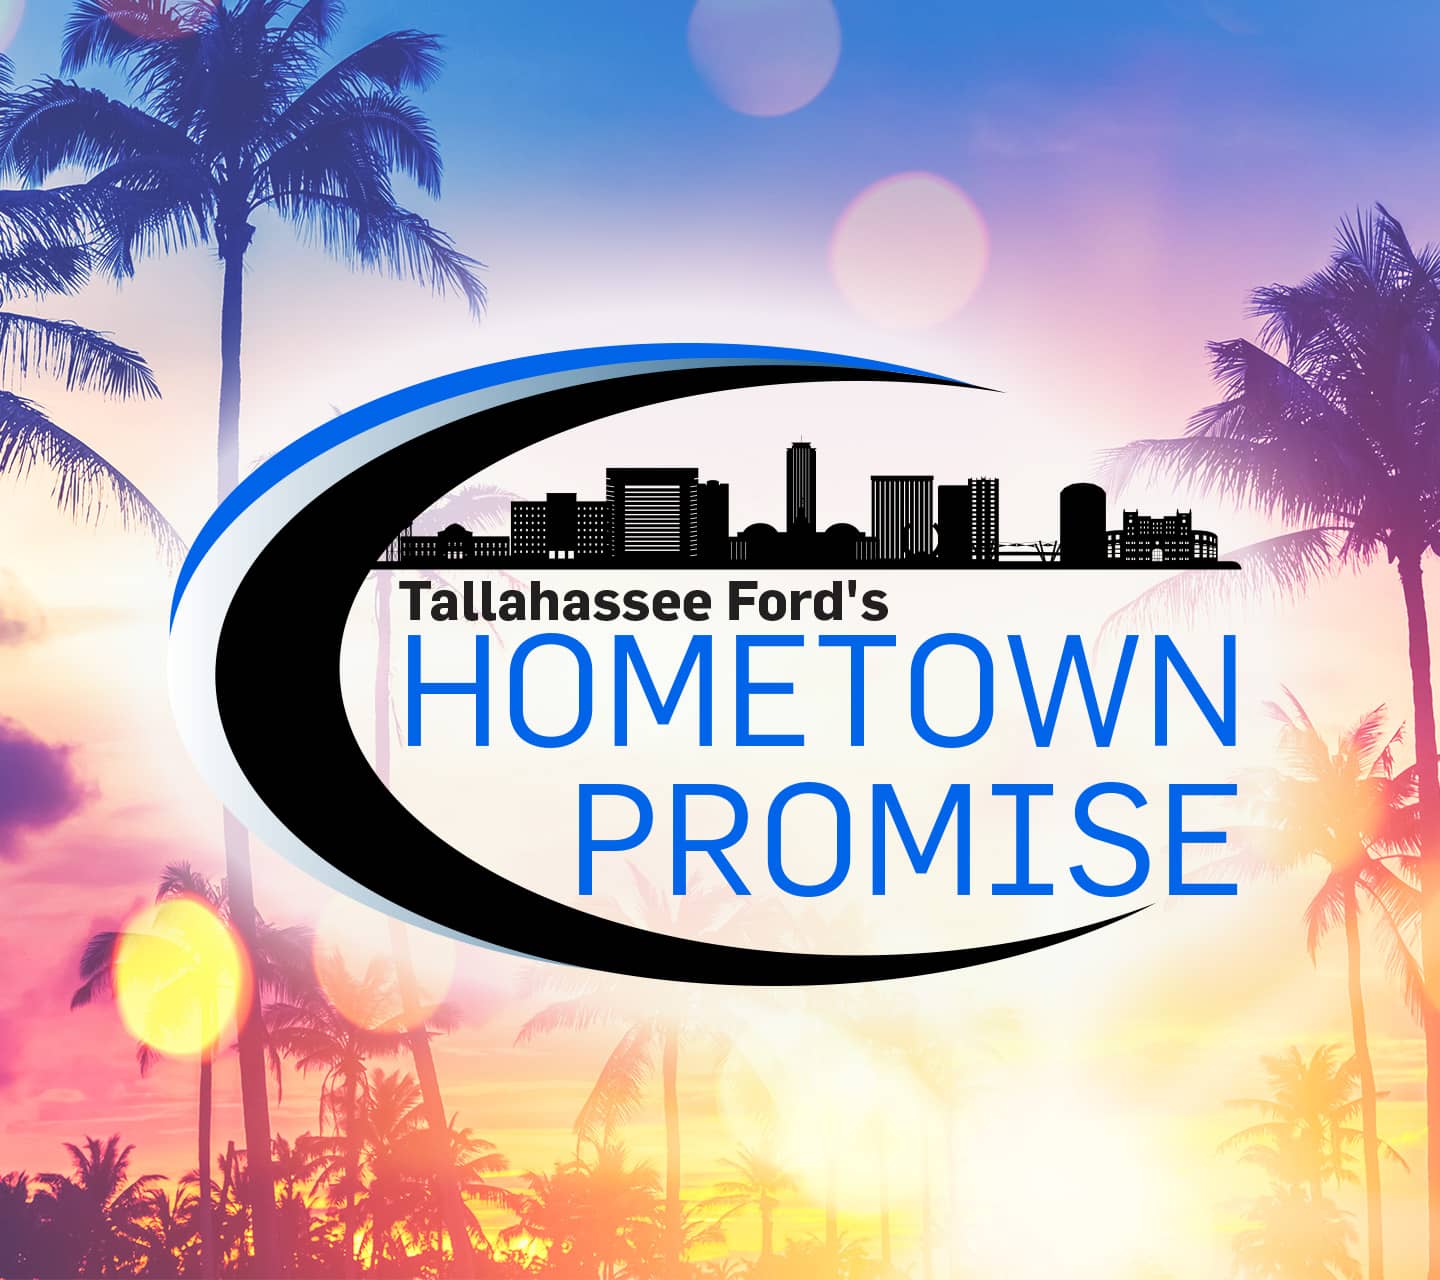 Tallahassee Ford's Hometown Promise